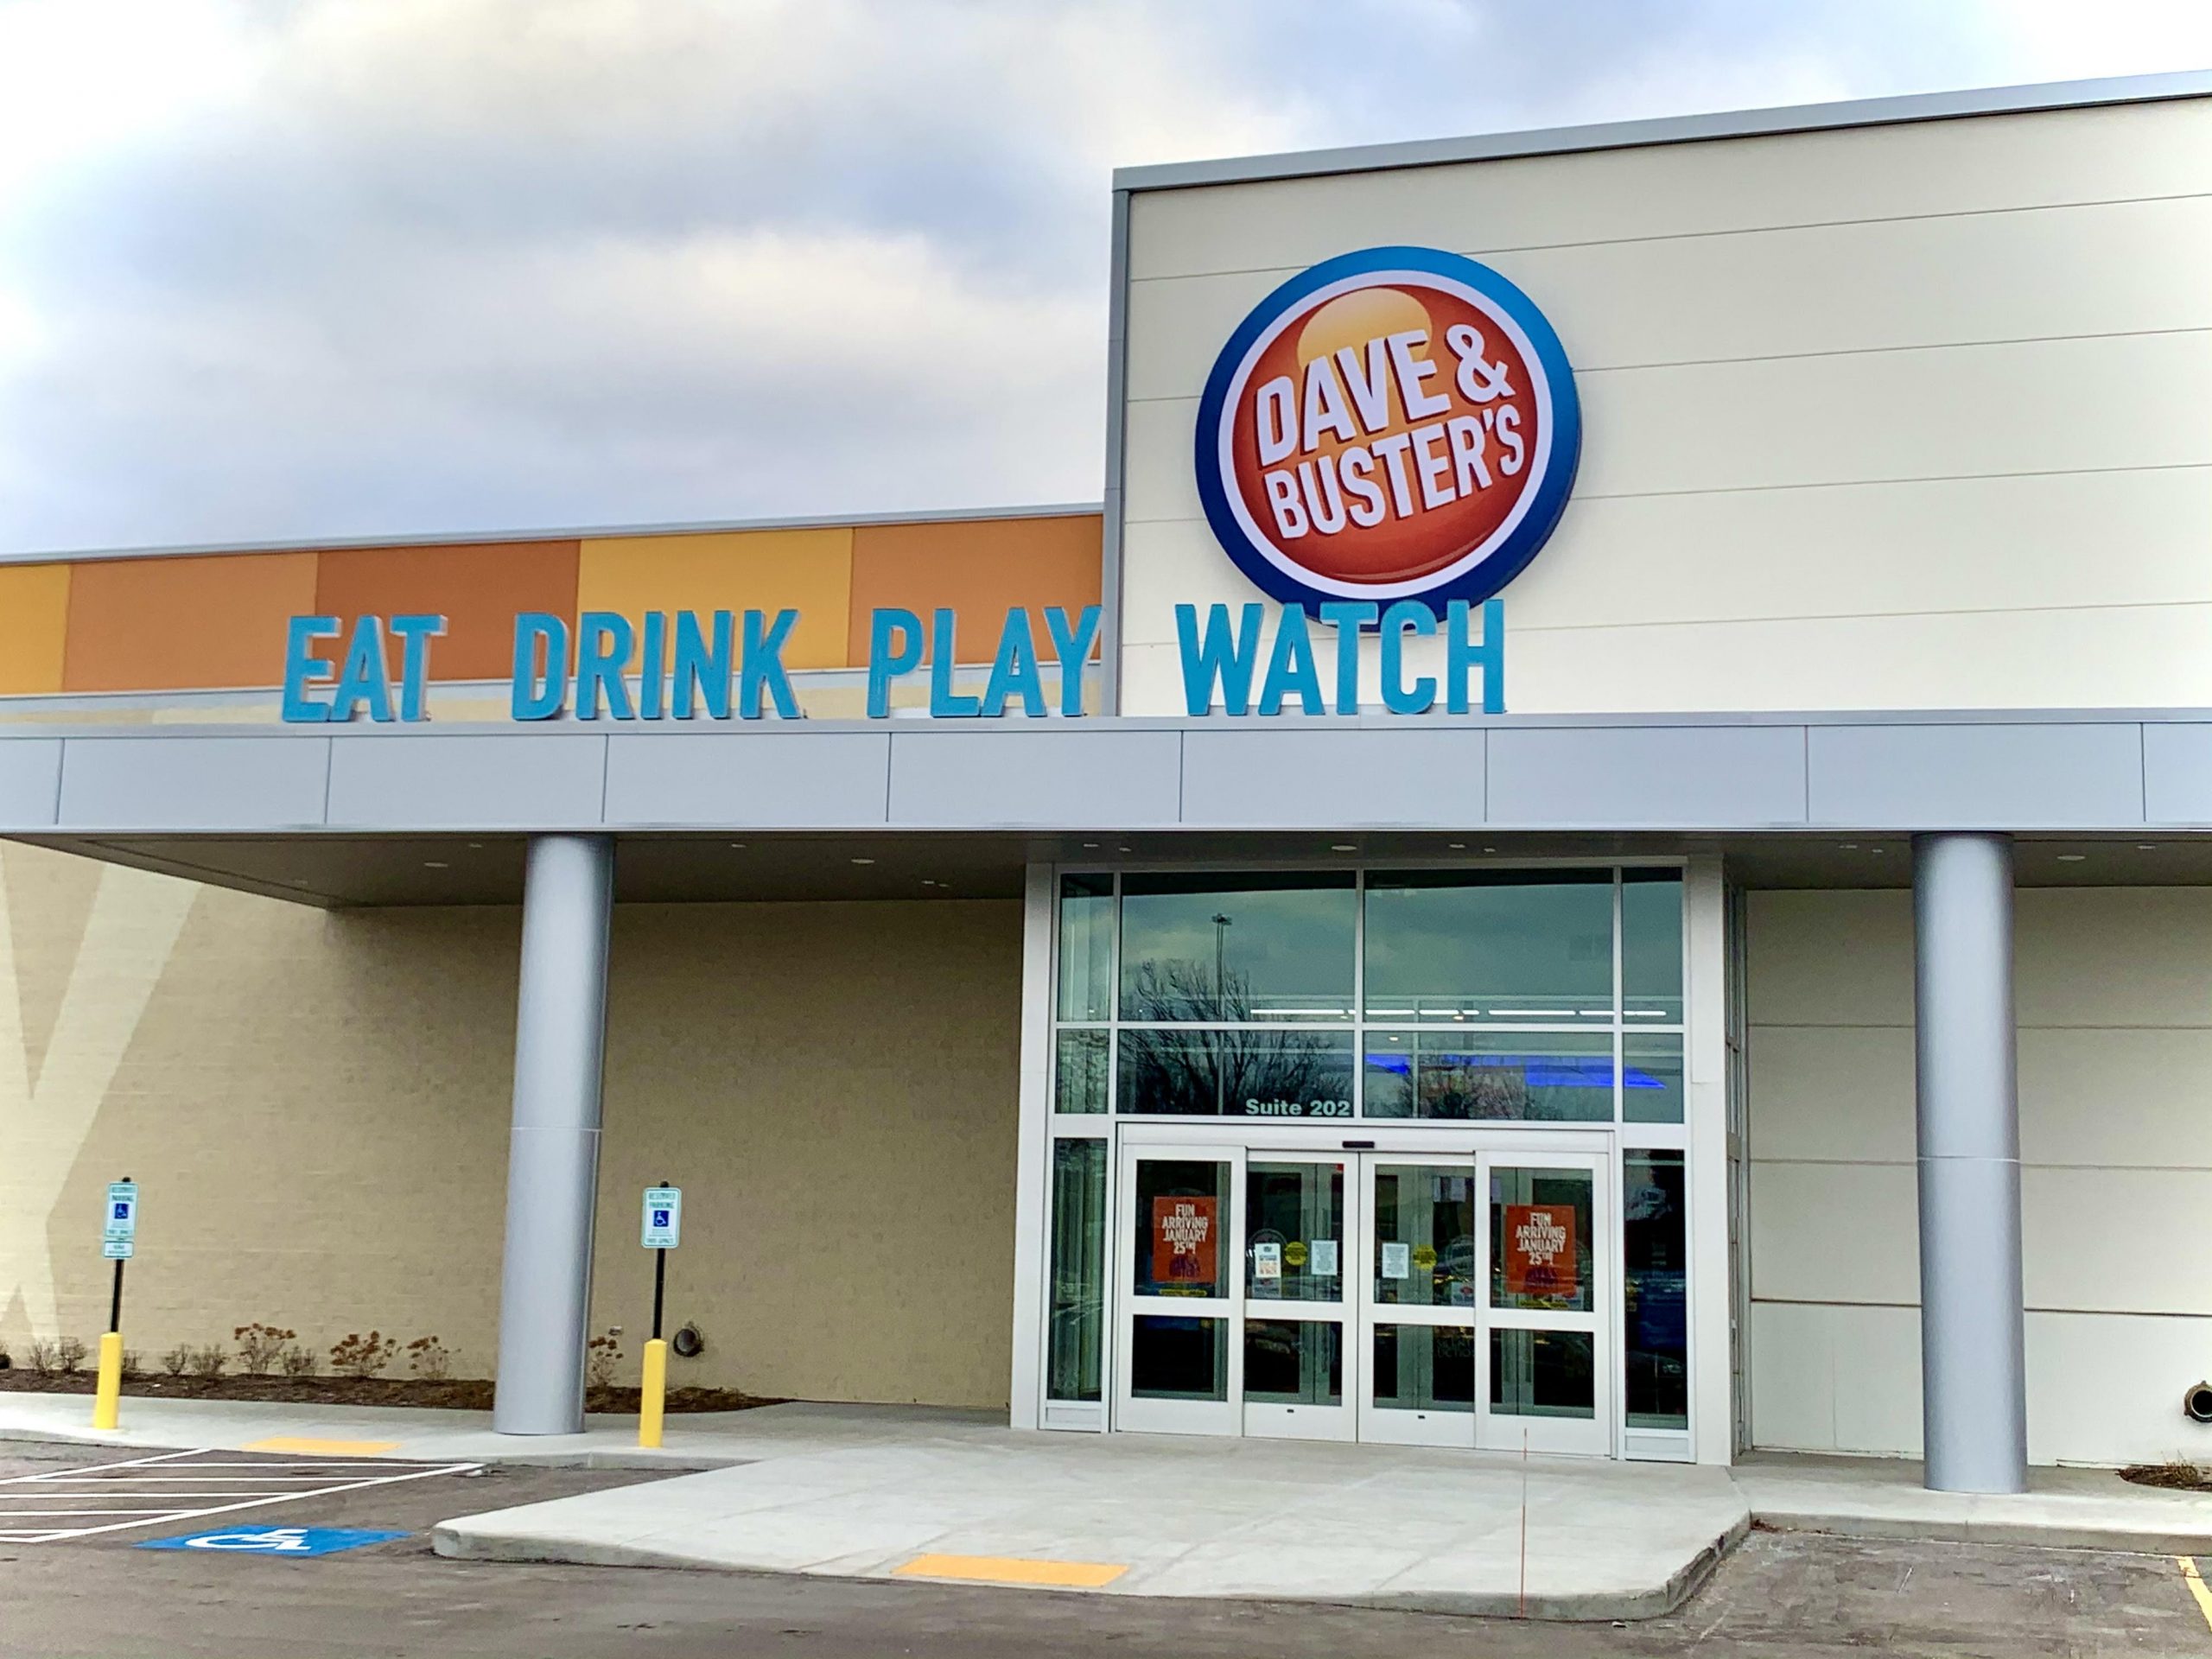 Dave & Buster's Green Bay, WI